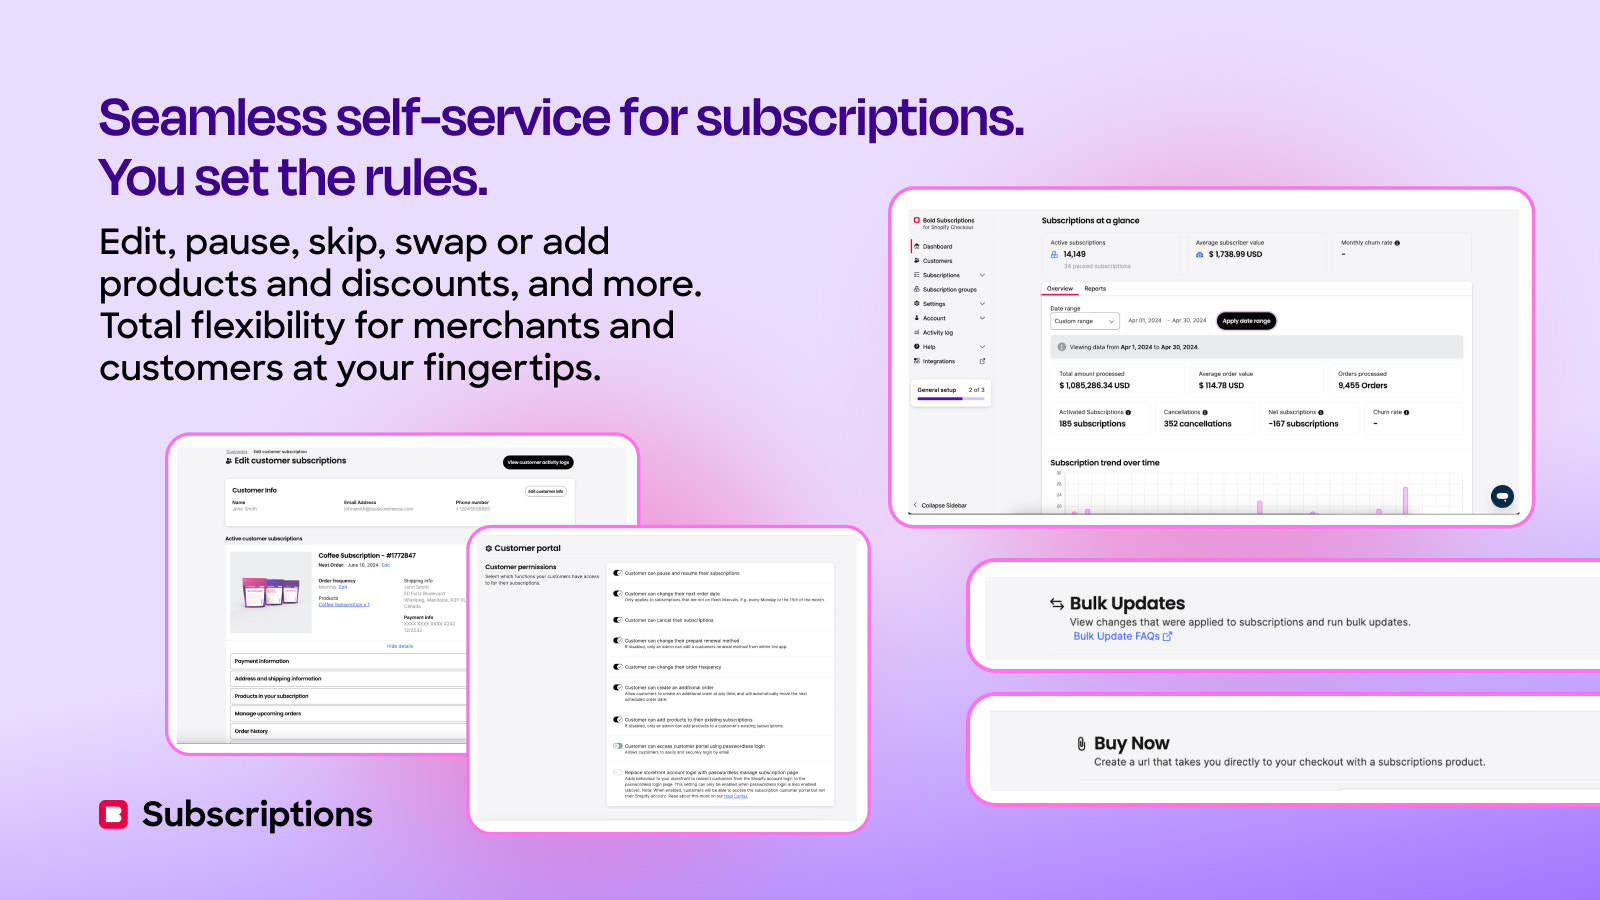 Seamless self-service for subscriptions - you set the rules!